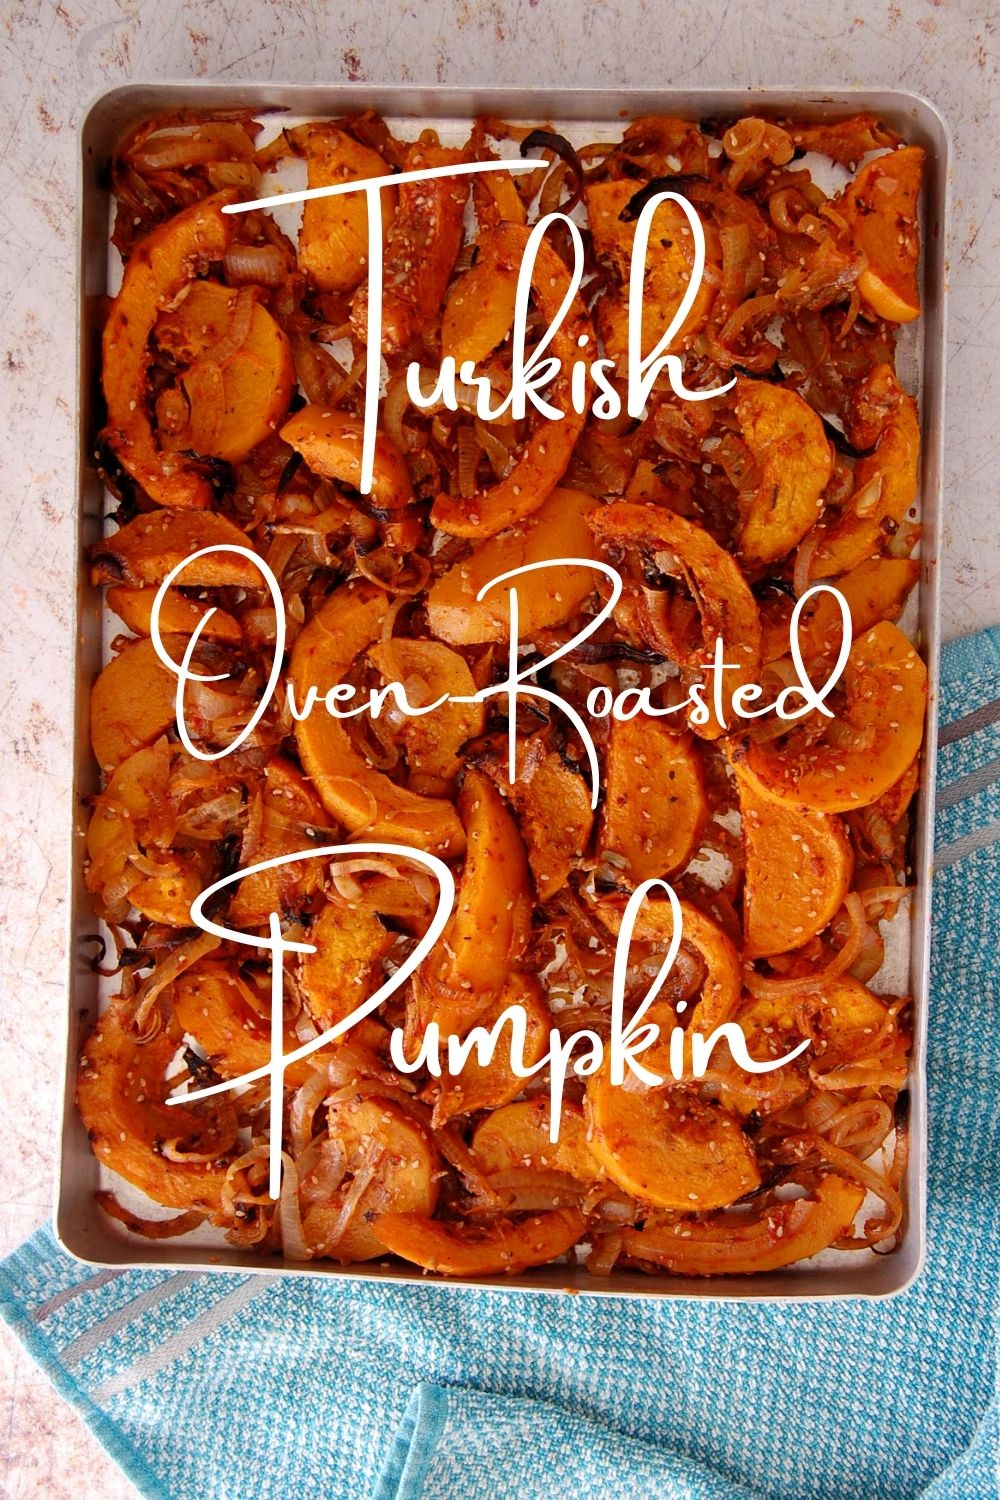 “Pinable image for Sinkonta recipe. Tray off roast pumpkin and onions cooked. Text overy lay reads: Turkish Oven Roasted Pumpkin. 